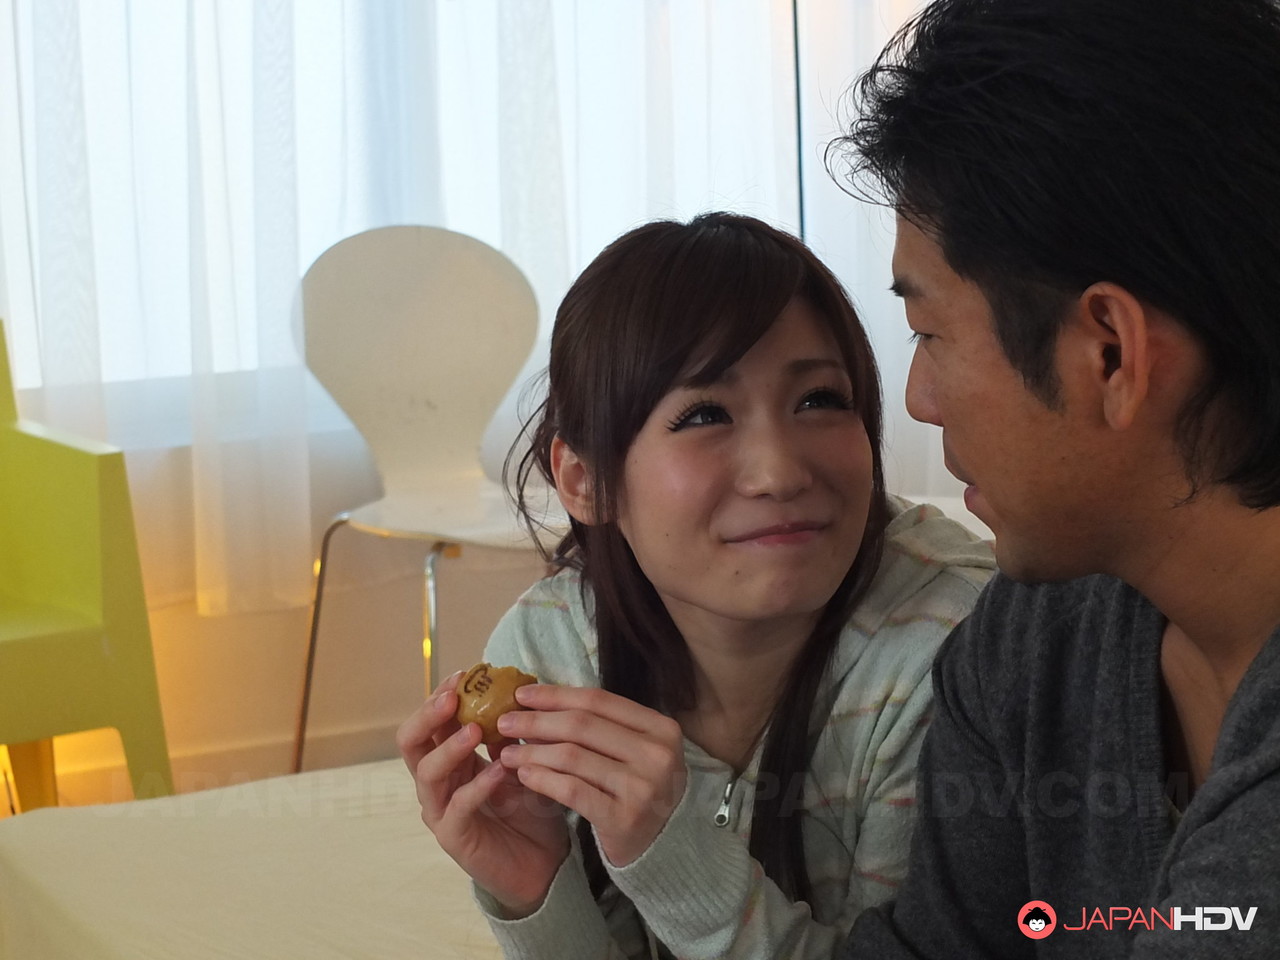 Asian nymphos with hot bodies Koi Miyamura and Tsukushi toy each other's clam 色情照片 #427162243 | Japan HDV Pics, Koi Miyamura, Tsukushi, Japanese, 手机色情